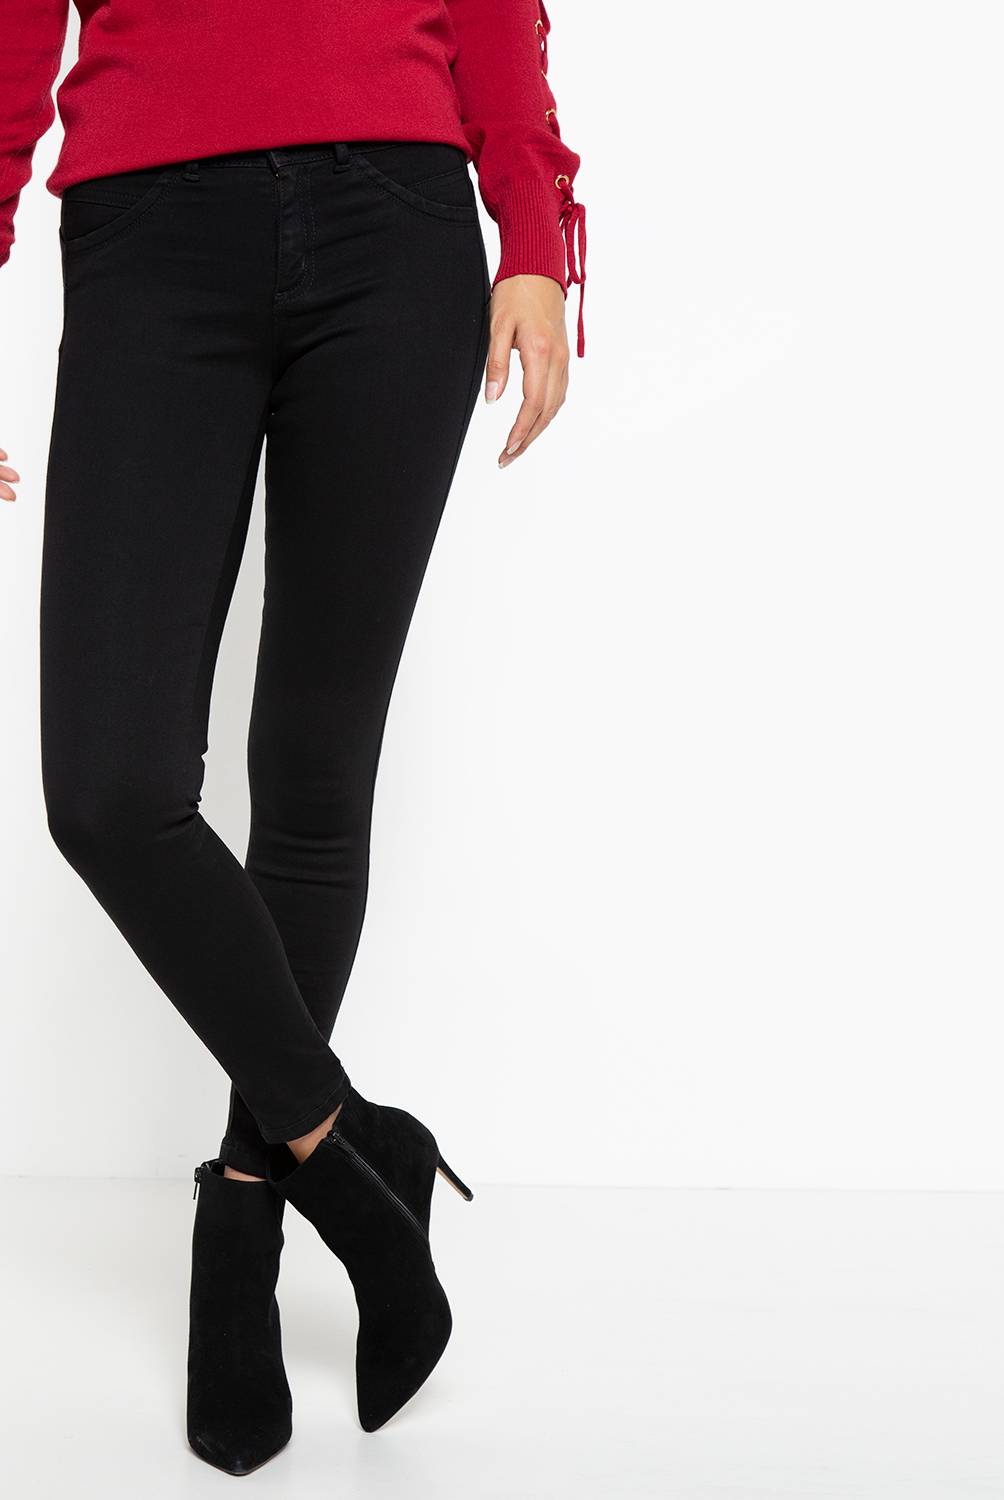 Mossimo - Jeans Skinny Mujer